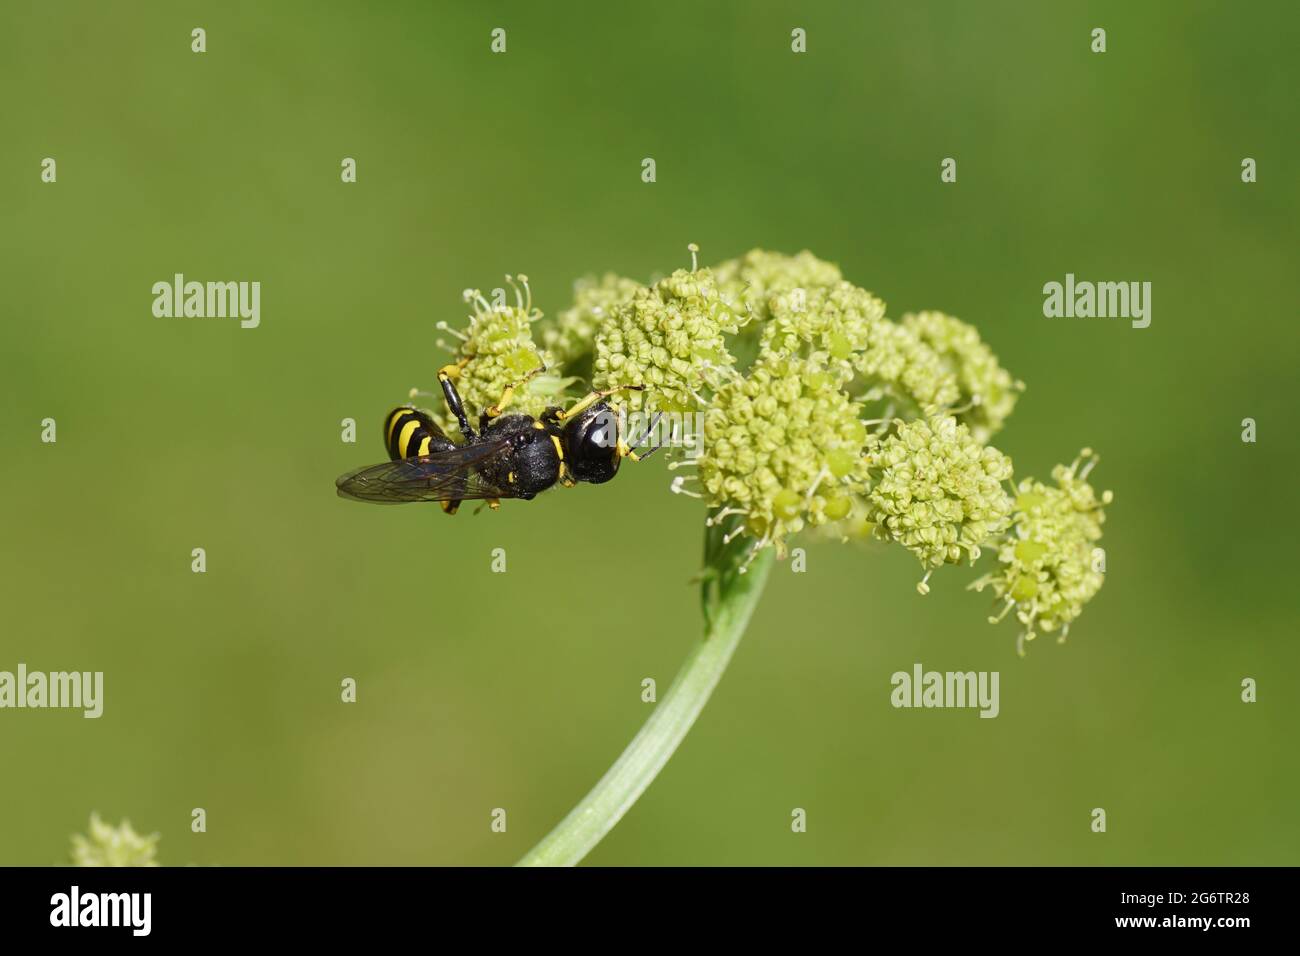 Wasp Ectemnius, family Sand wasps, digger wasps (Crabronidae ). On flowers of Lovage (Levisticum officinale) umbellifers family (Apiaceae, Stock Photo